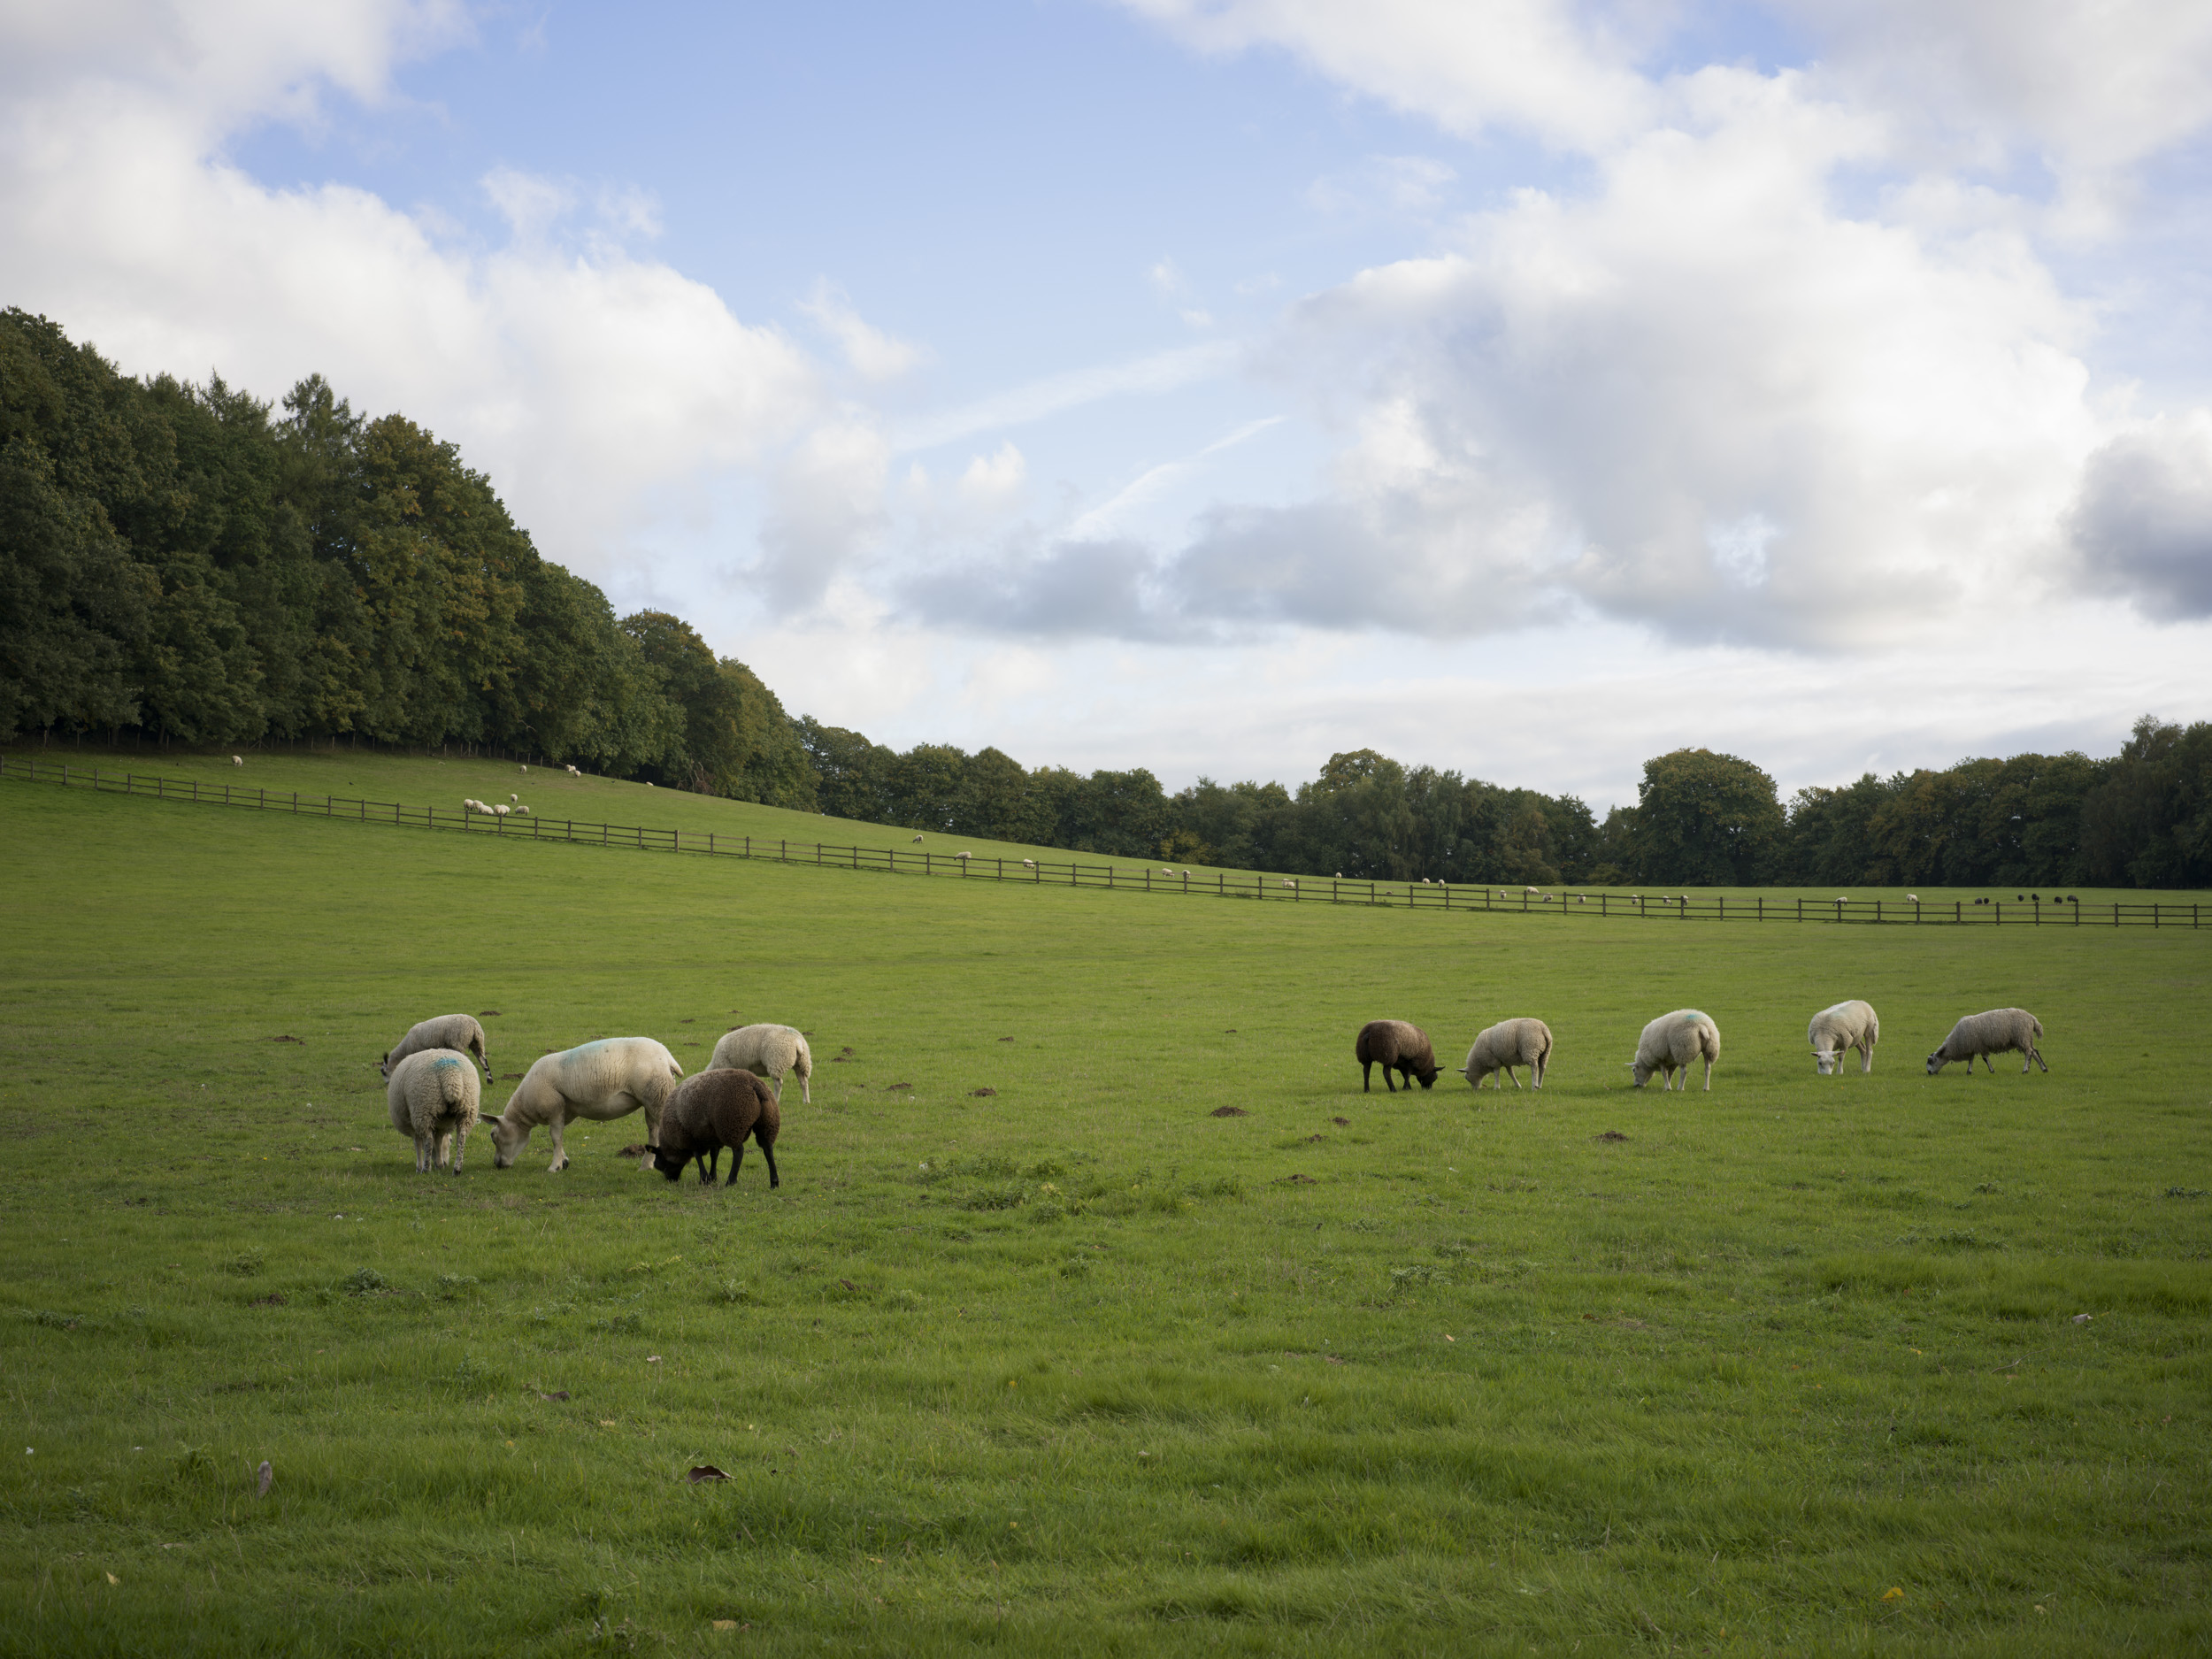 Sample image taken with the Hasselblad X2D 100C of a field with sheep